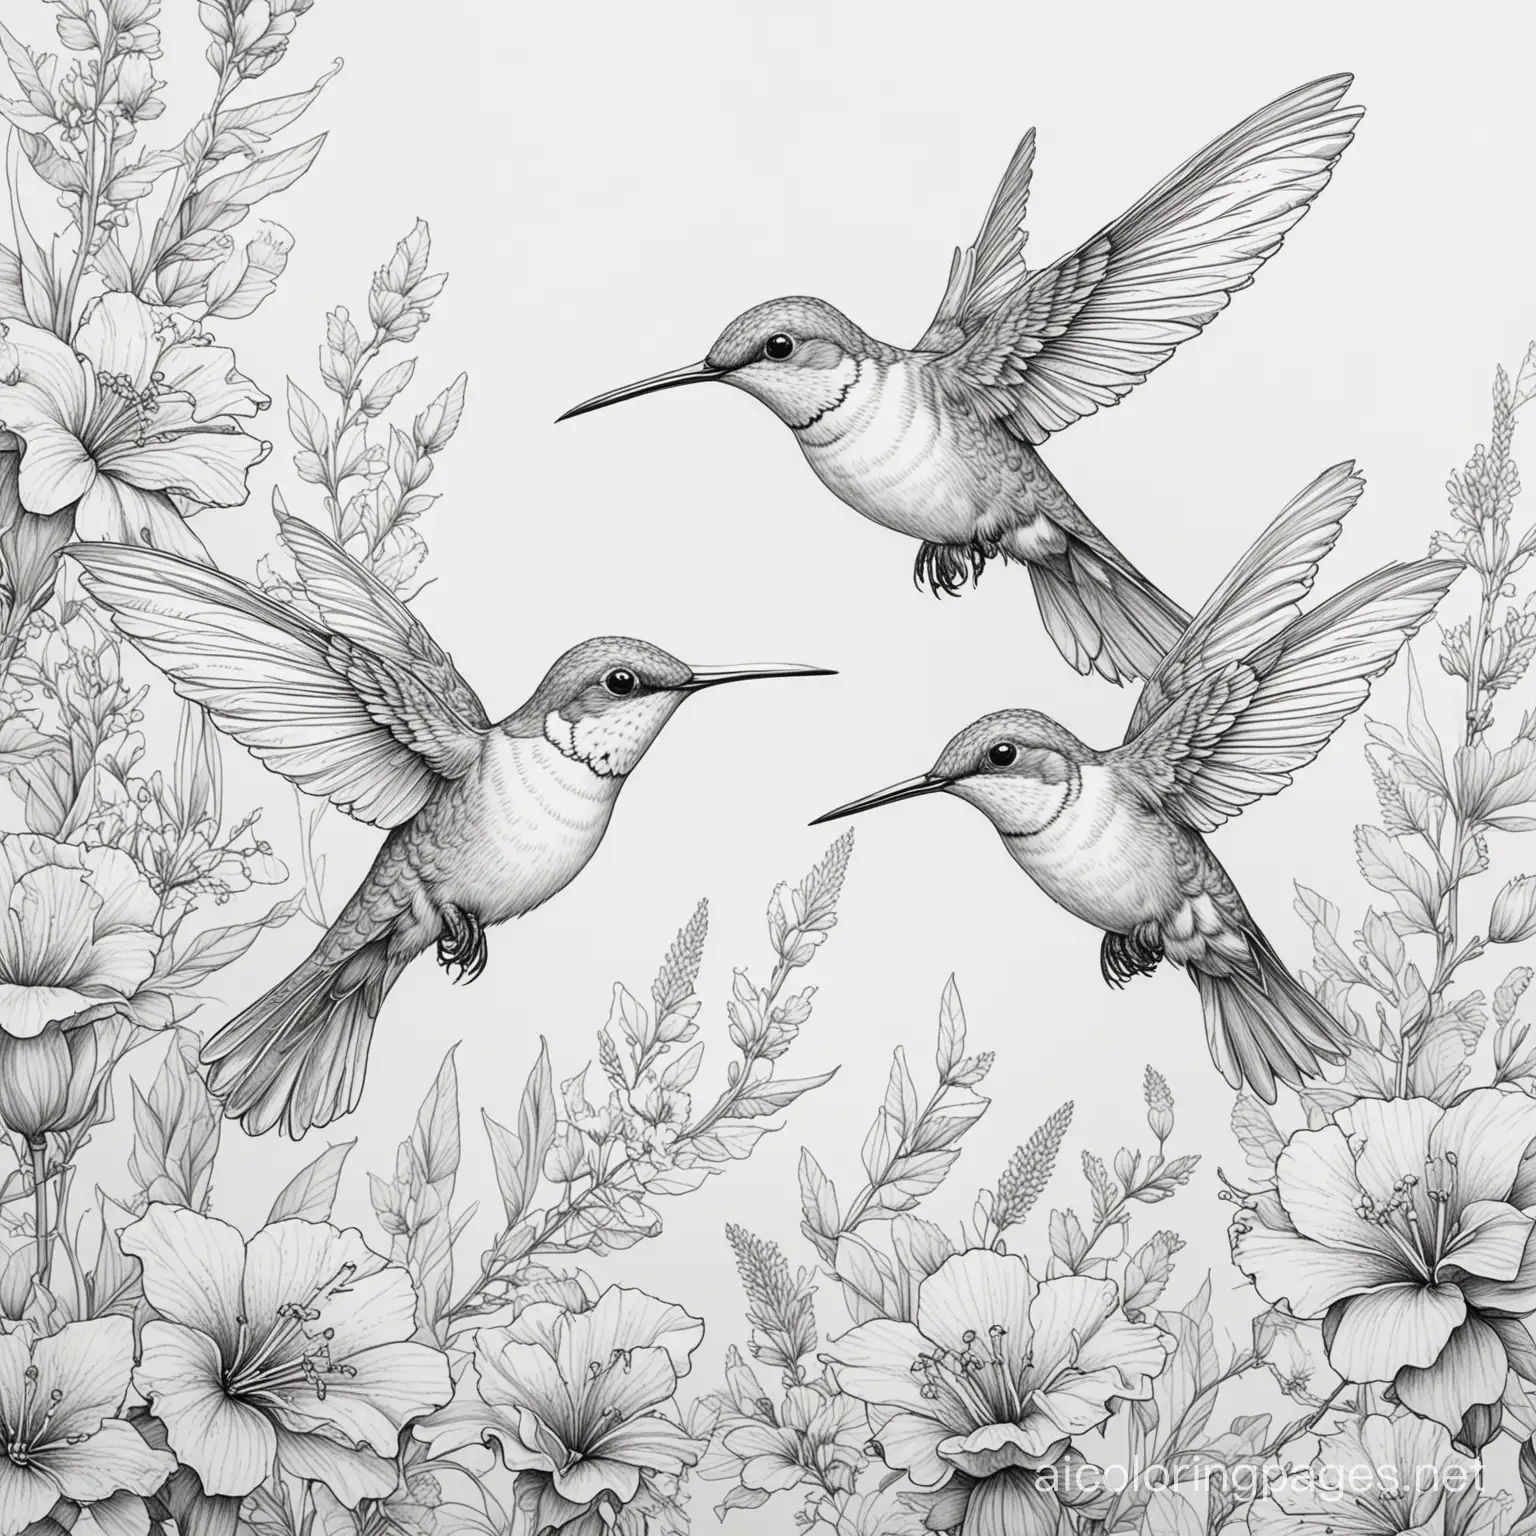 Three-Hummingbirds-Feeding-on-Flowers-Coloring-Page-with-Simplicity-and-Ample-White-Space